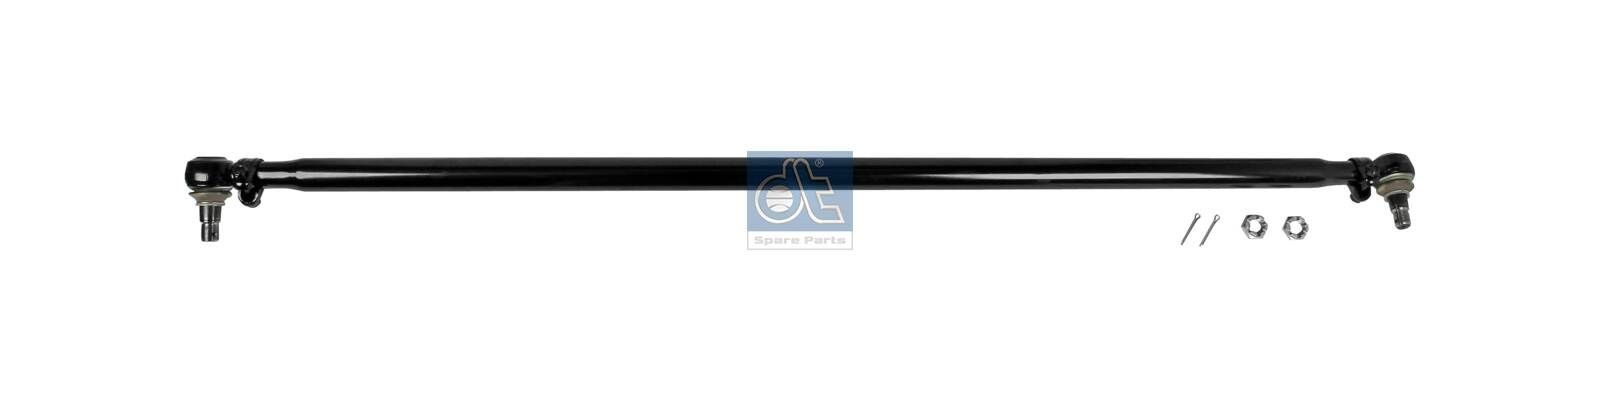 DT Spare Parts 6.53008 Rod Assembly 5010 145 584